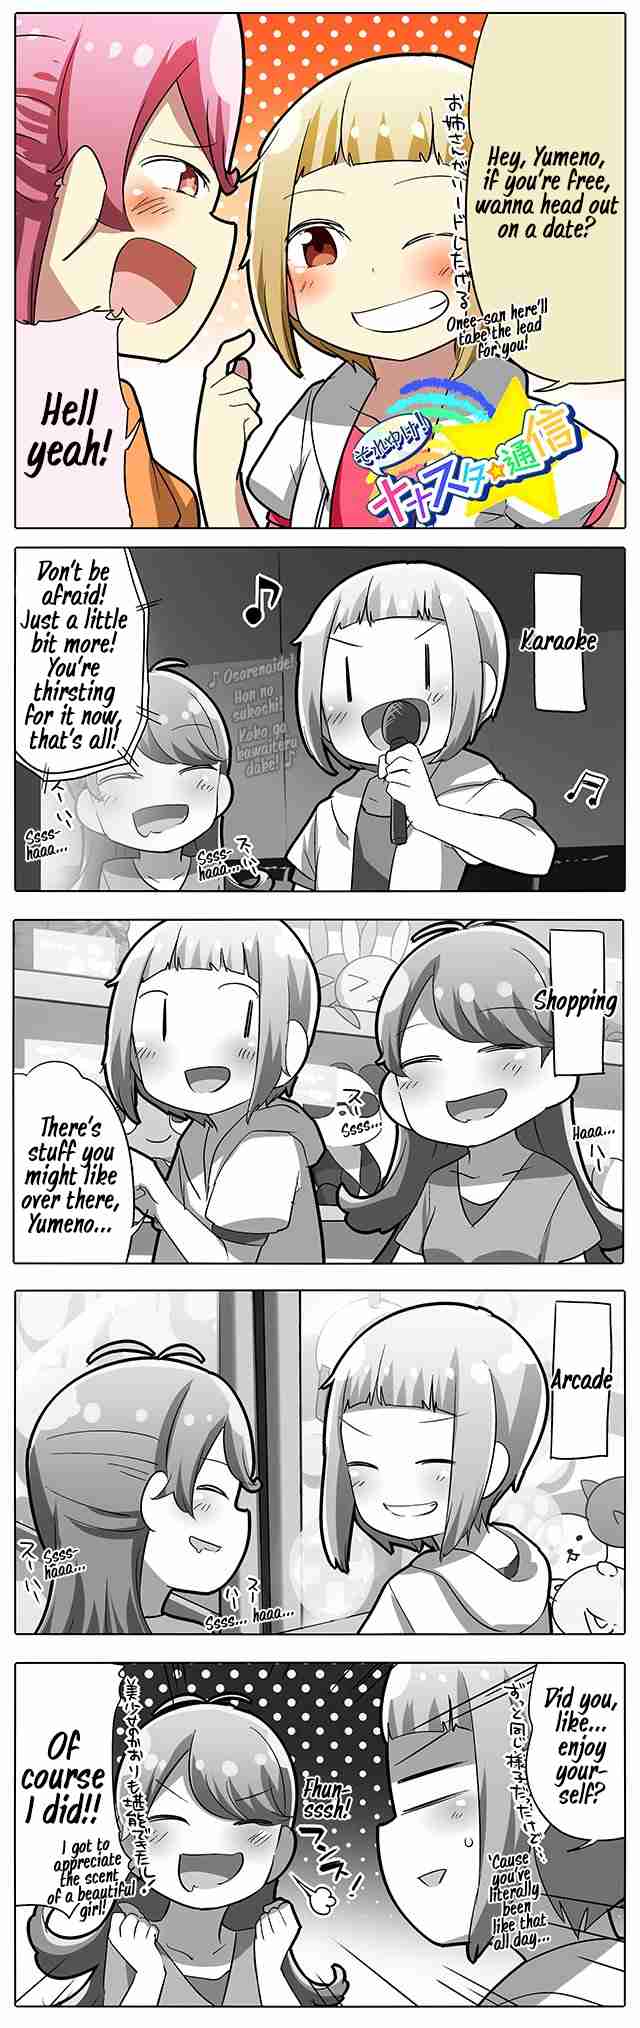 Let's Go! Nanastar Comms Ch. 200 A Date with Onee san